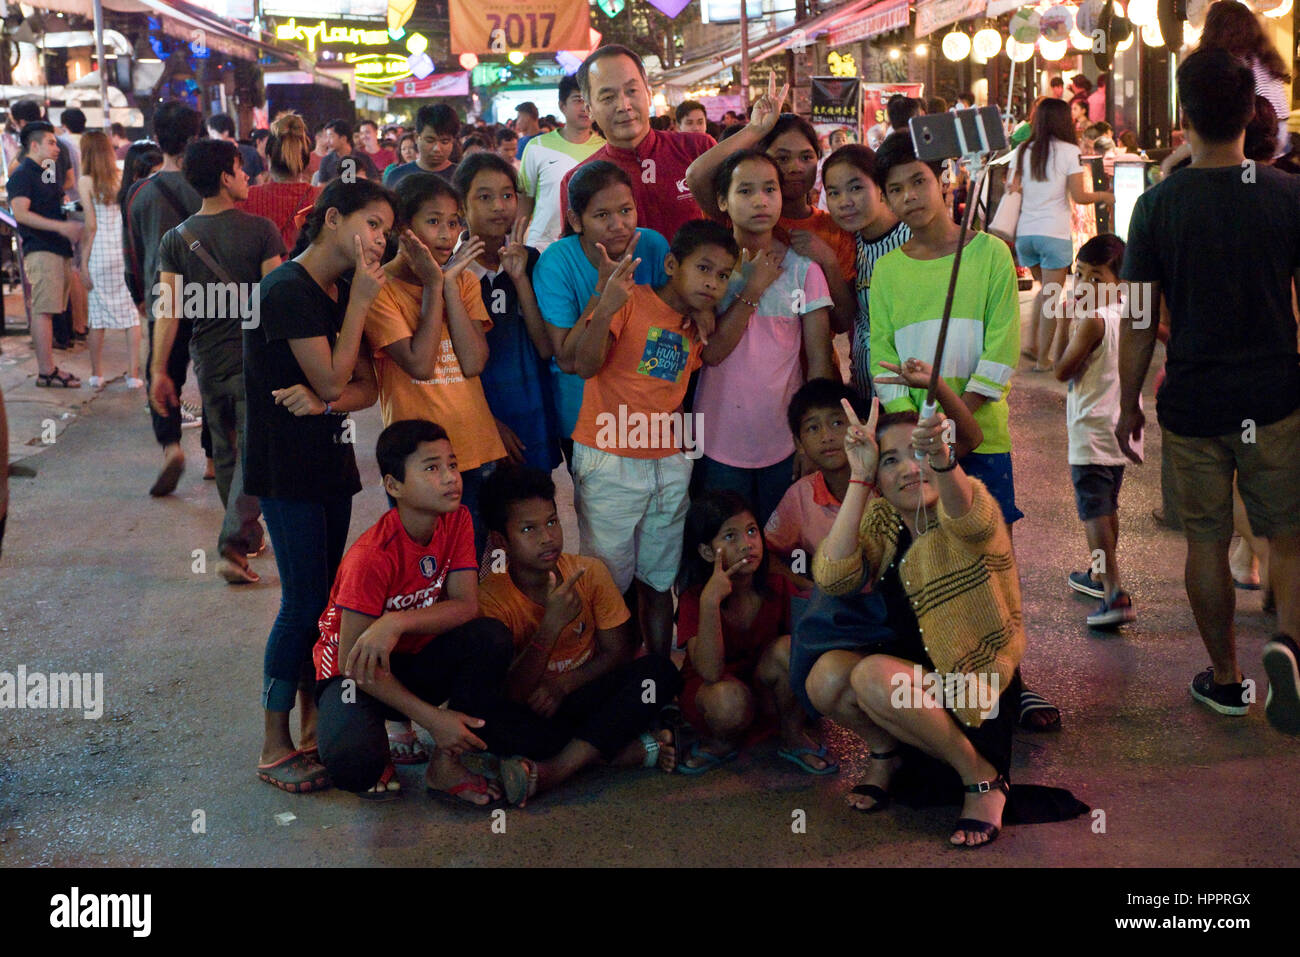 A group family of Asian tourists on Pub Street, Siem Reap, taking a self portrait with a selfie stick and mobile phone on a busy night street scene. Stock Photo